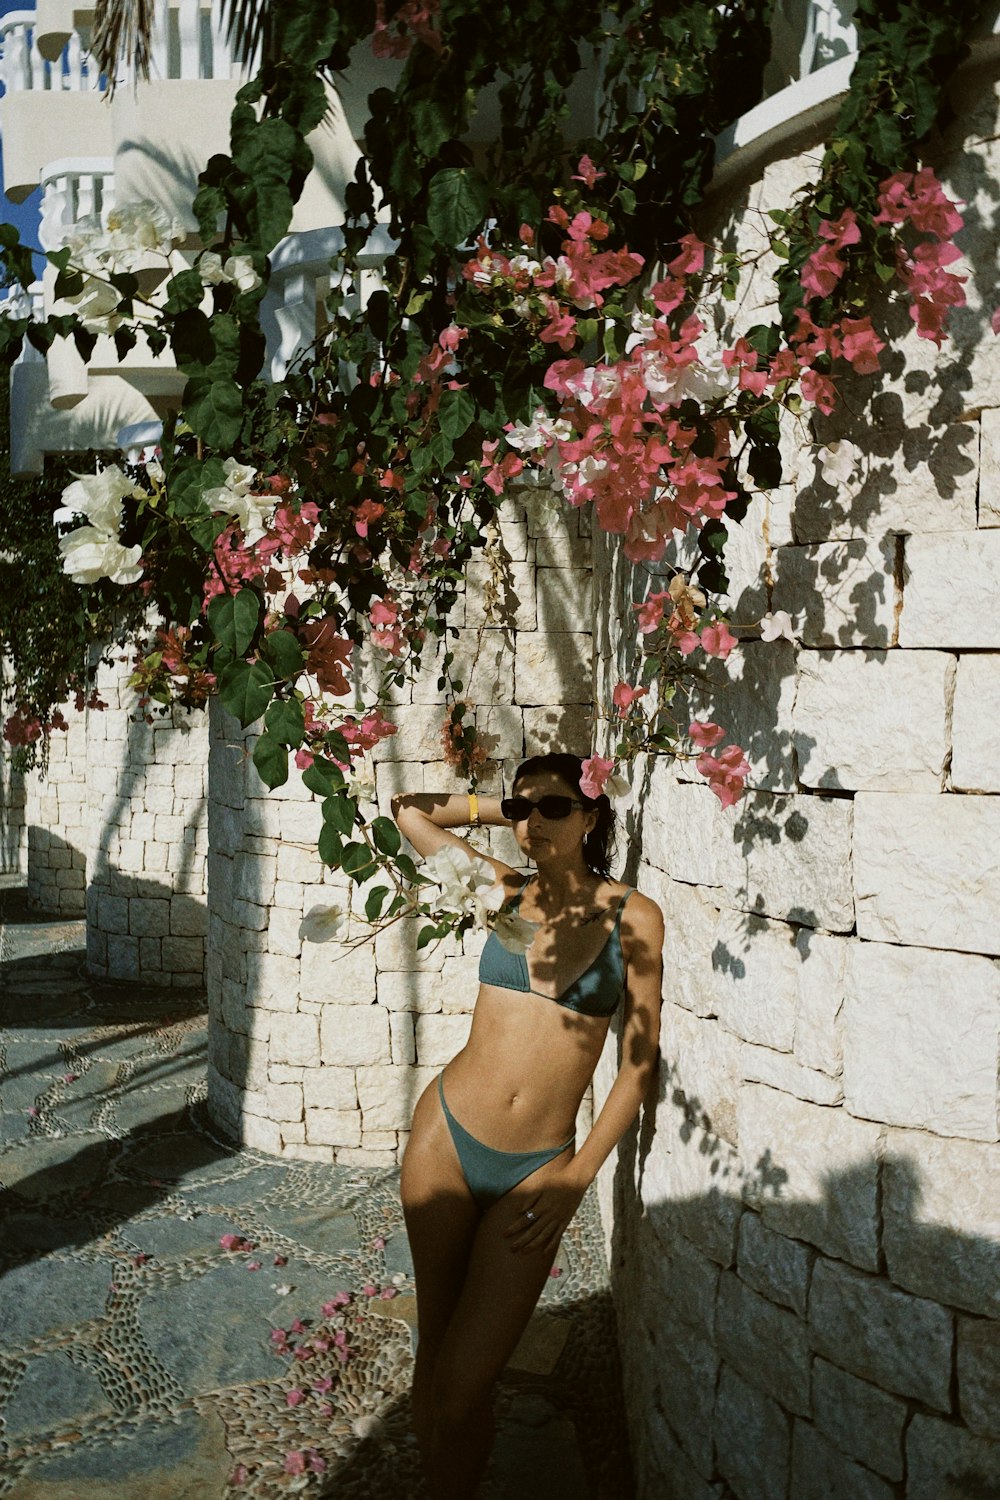 a woman in a bikini standing next to a stone wall